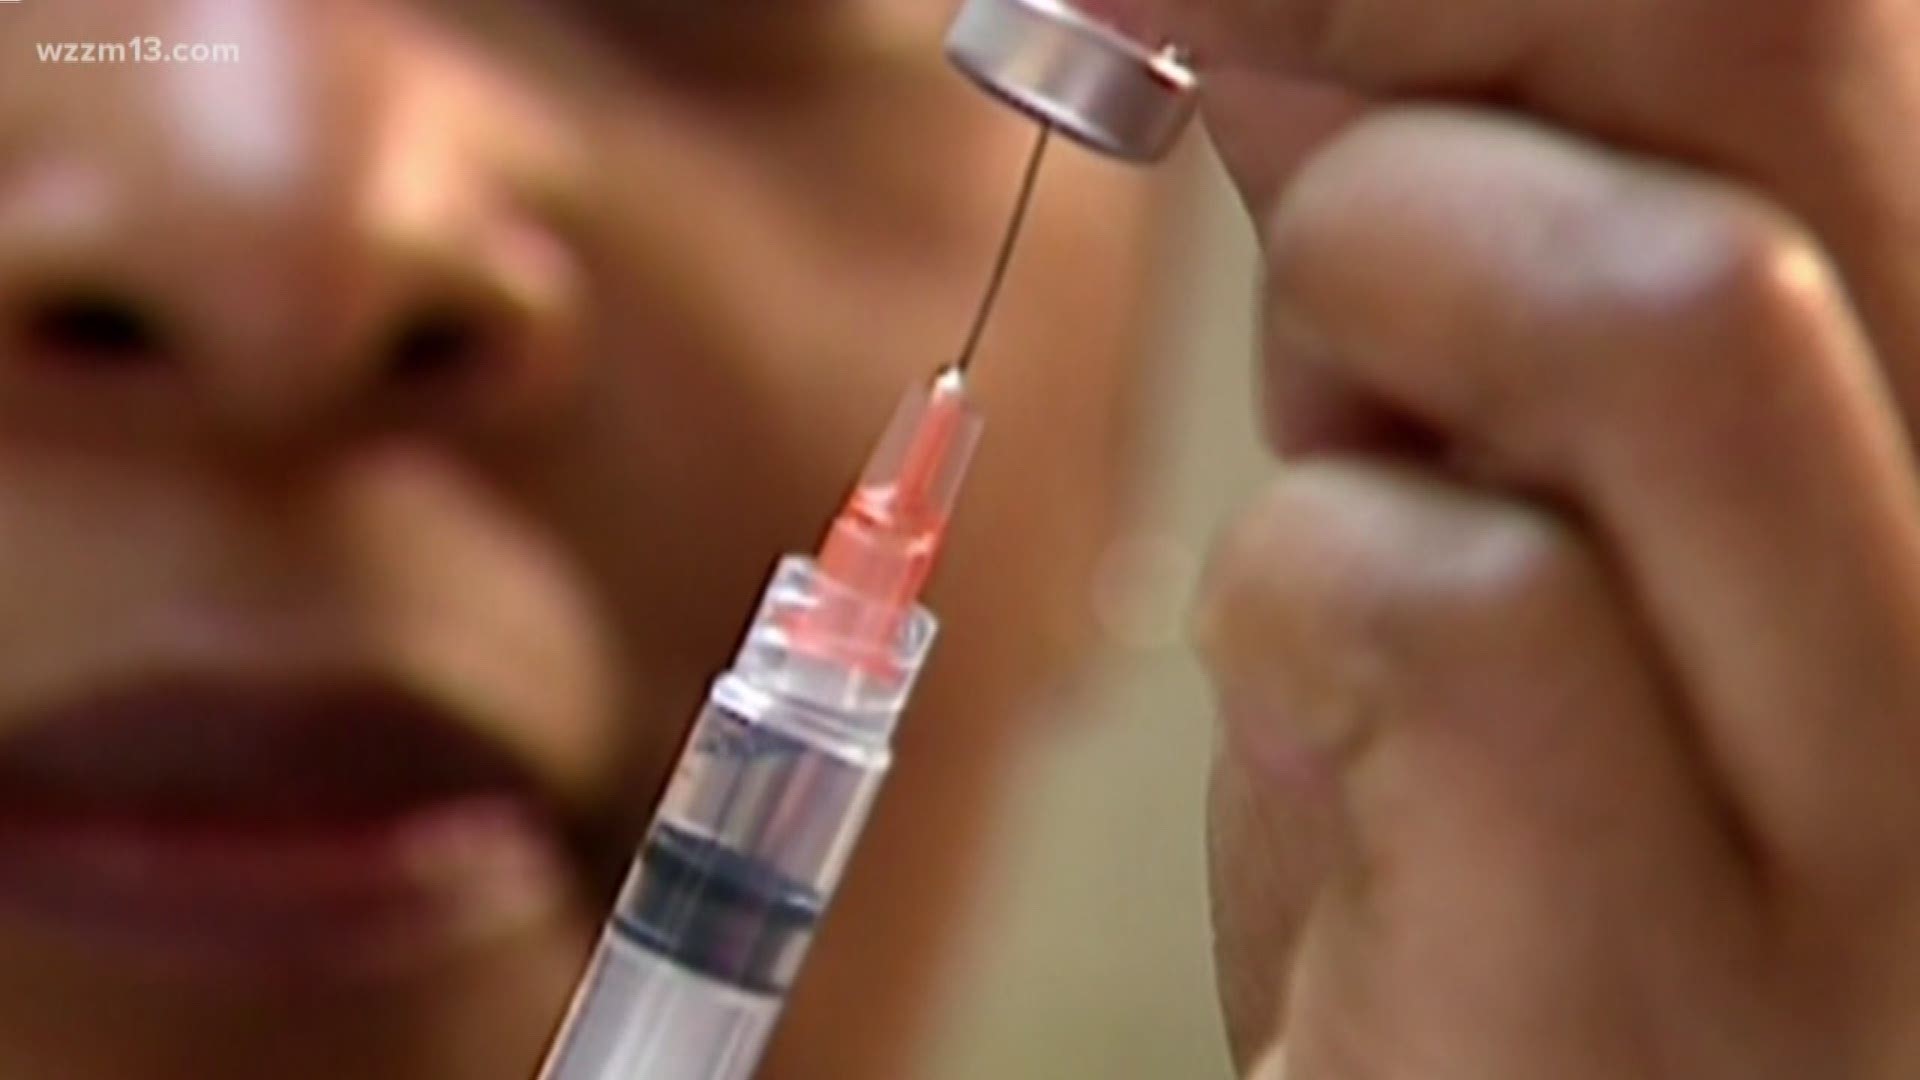 The total number of cases in the state is now up to 43 for 2019. The three newly confirmed cases are in Oakland County and Detroit. One person with measles was in Kent County last Friday, creating two exposure sites in Grand Rapids.